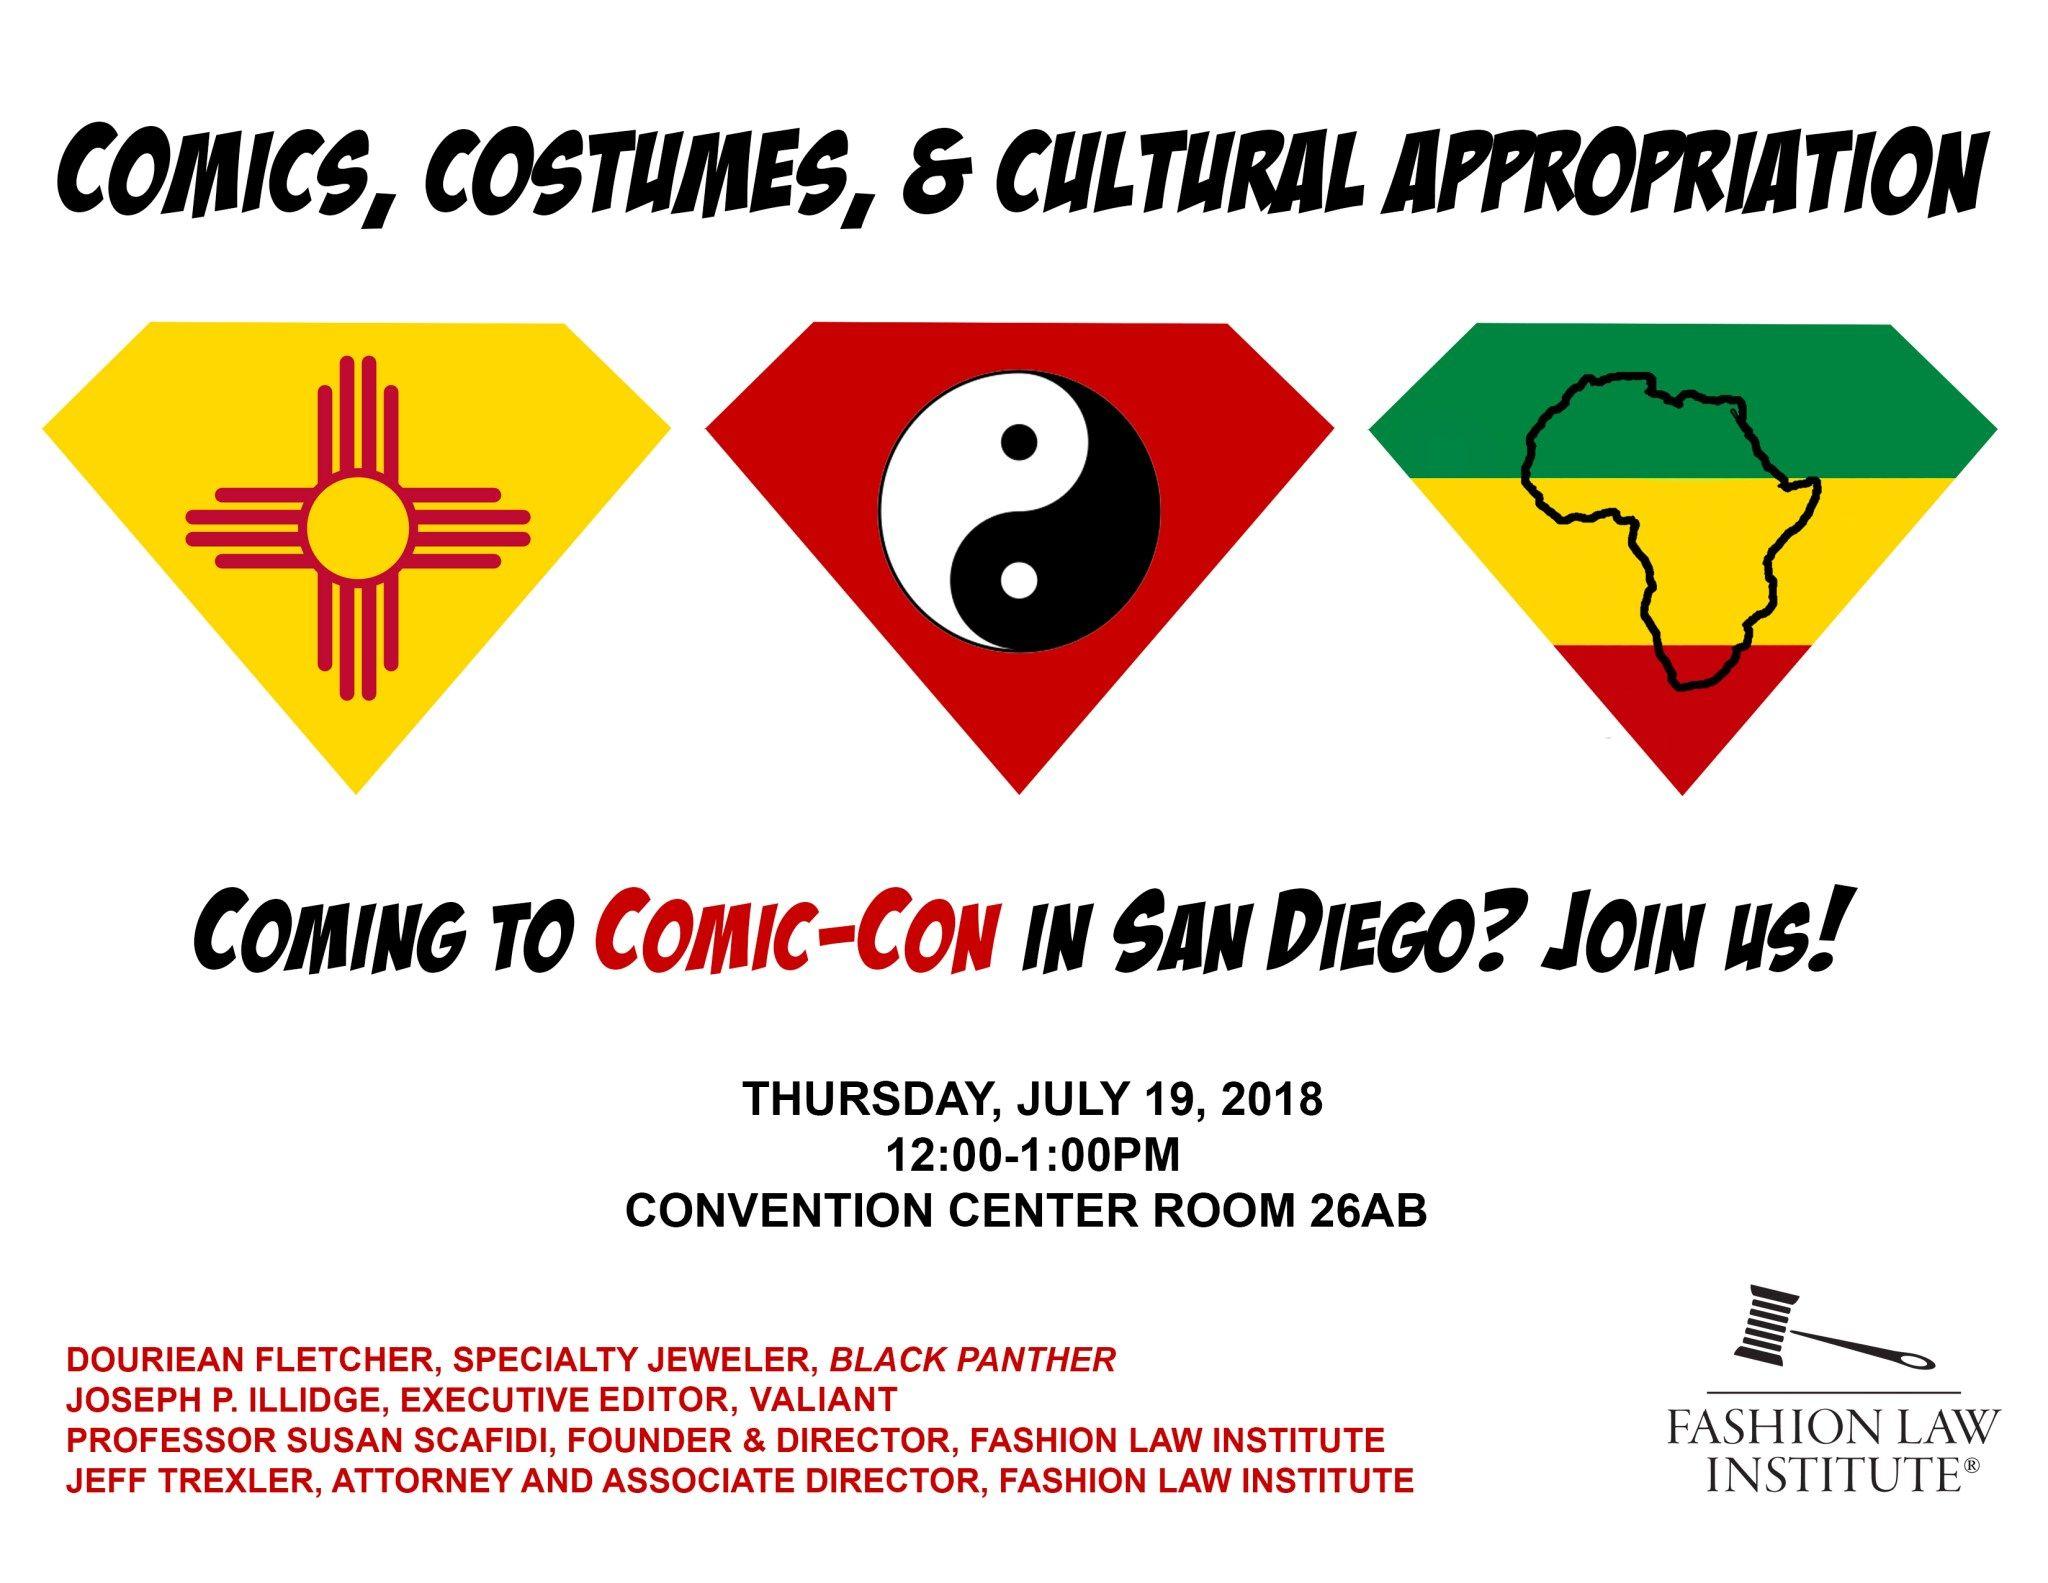 Three Diamond Shape Logo - Comics, Costumes, and Cultural Appropriation Law Institute